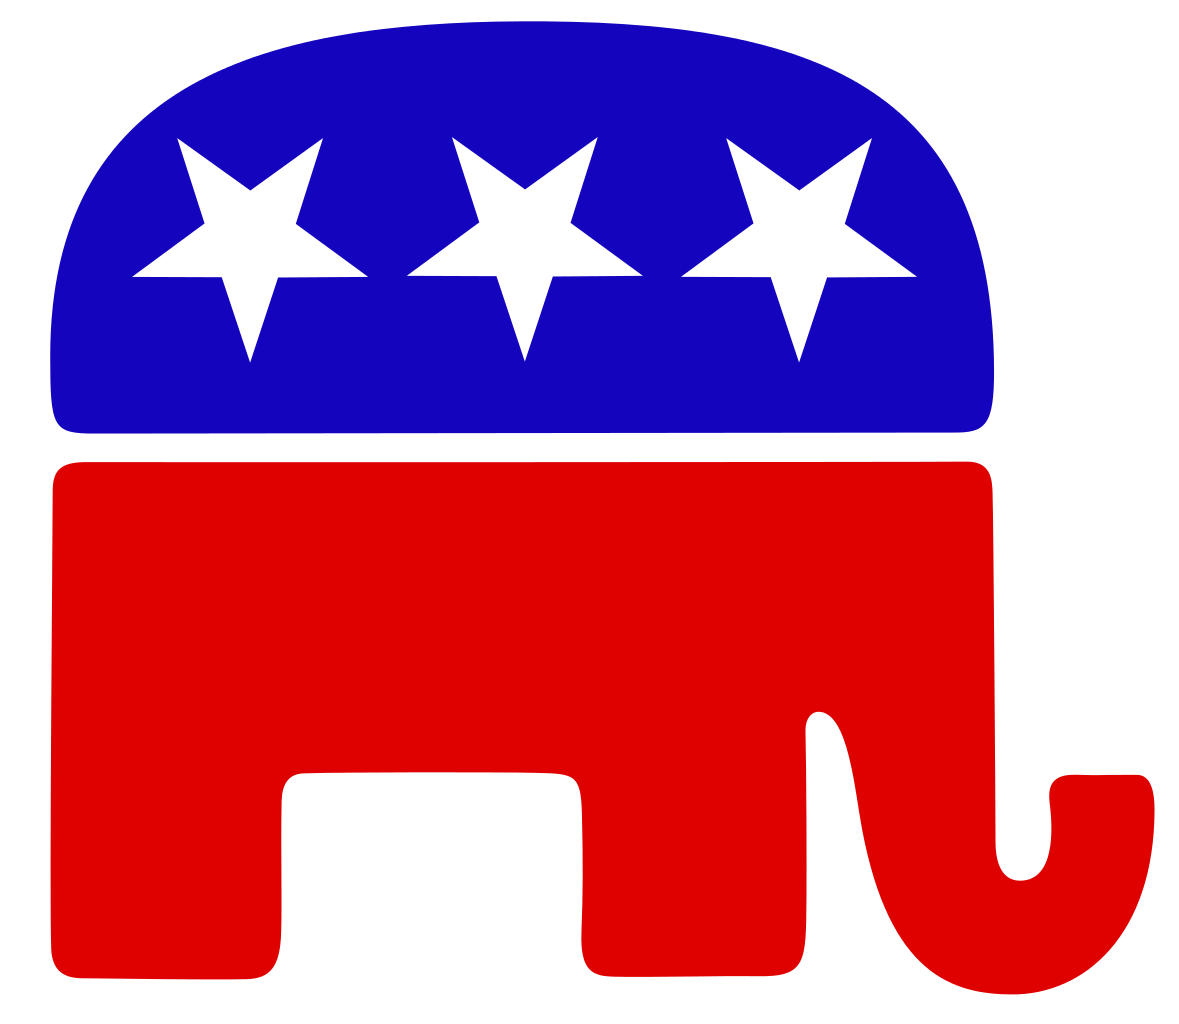 Logos For > Republican Party Symbol Change